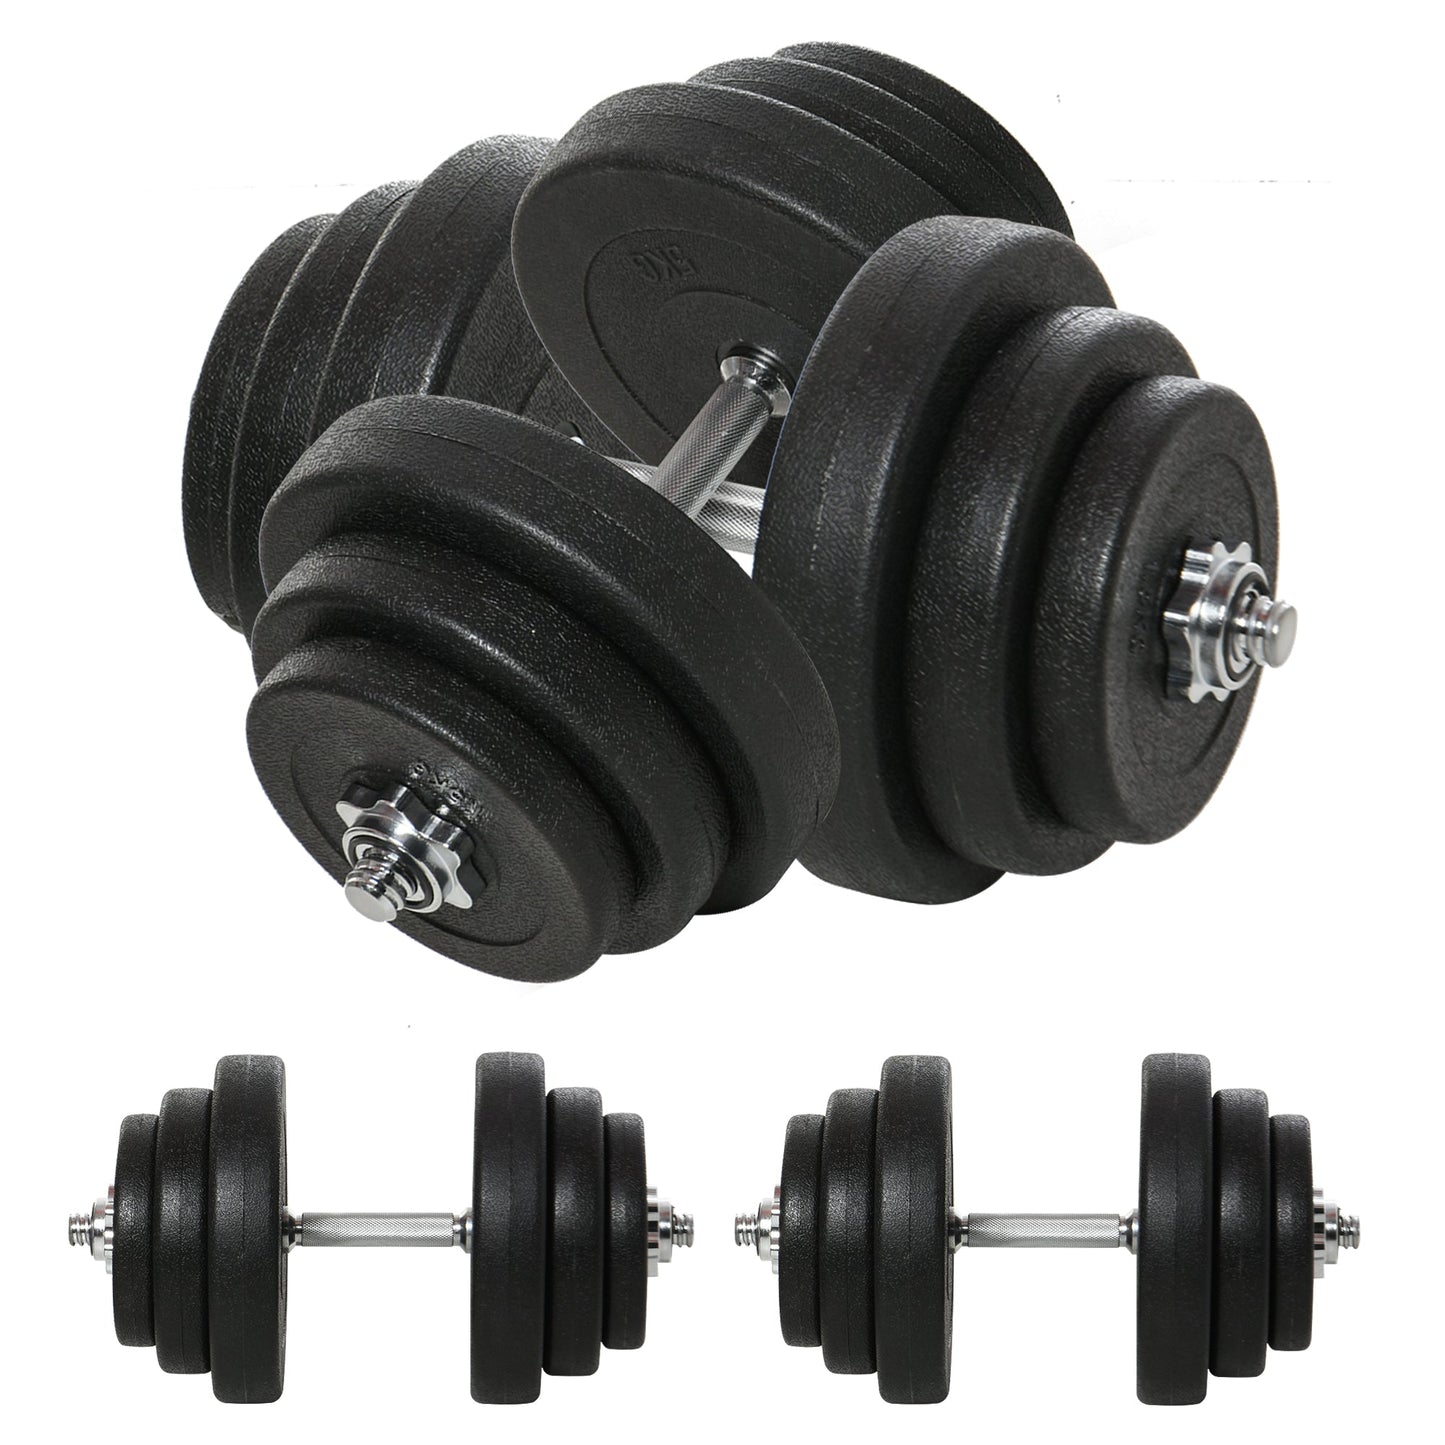 Adjustable 2 x 44lbs Weight Dumbbell Set for Weight Fitness Training Exercise Fitness Home Gym Equipment, Black (Pair) at Gallery Canada